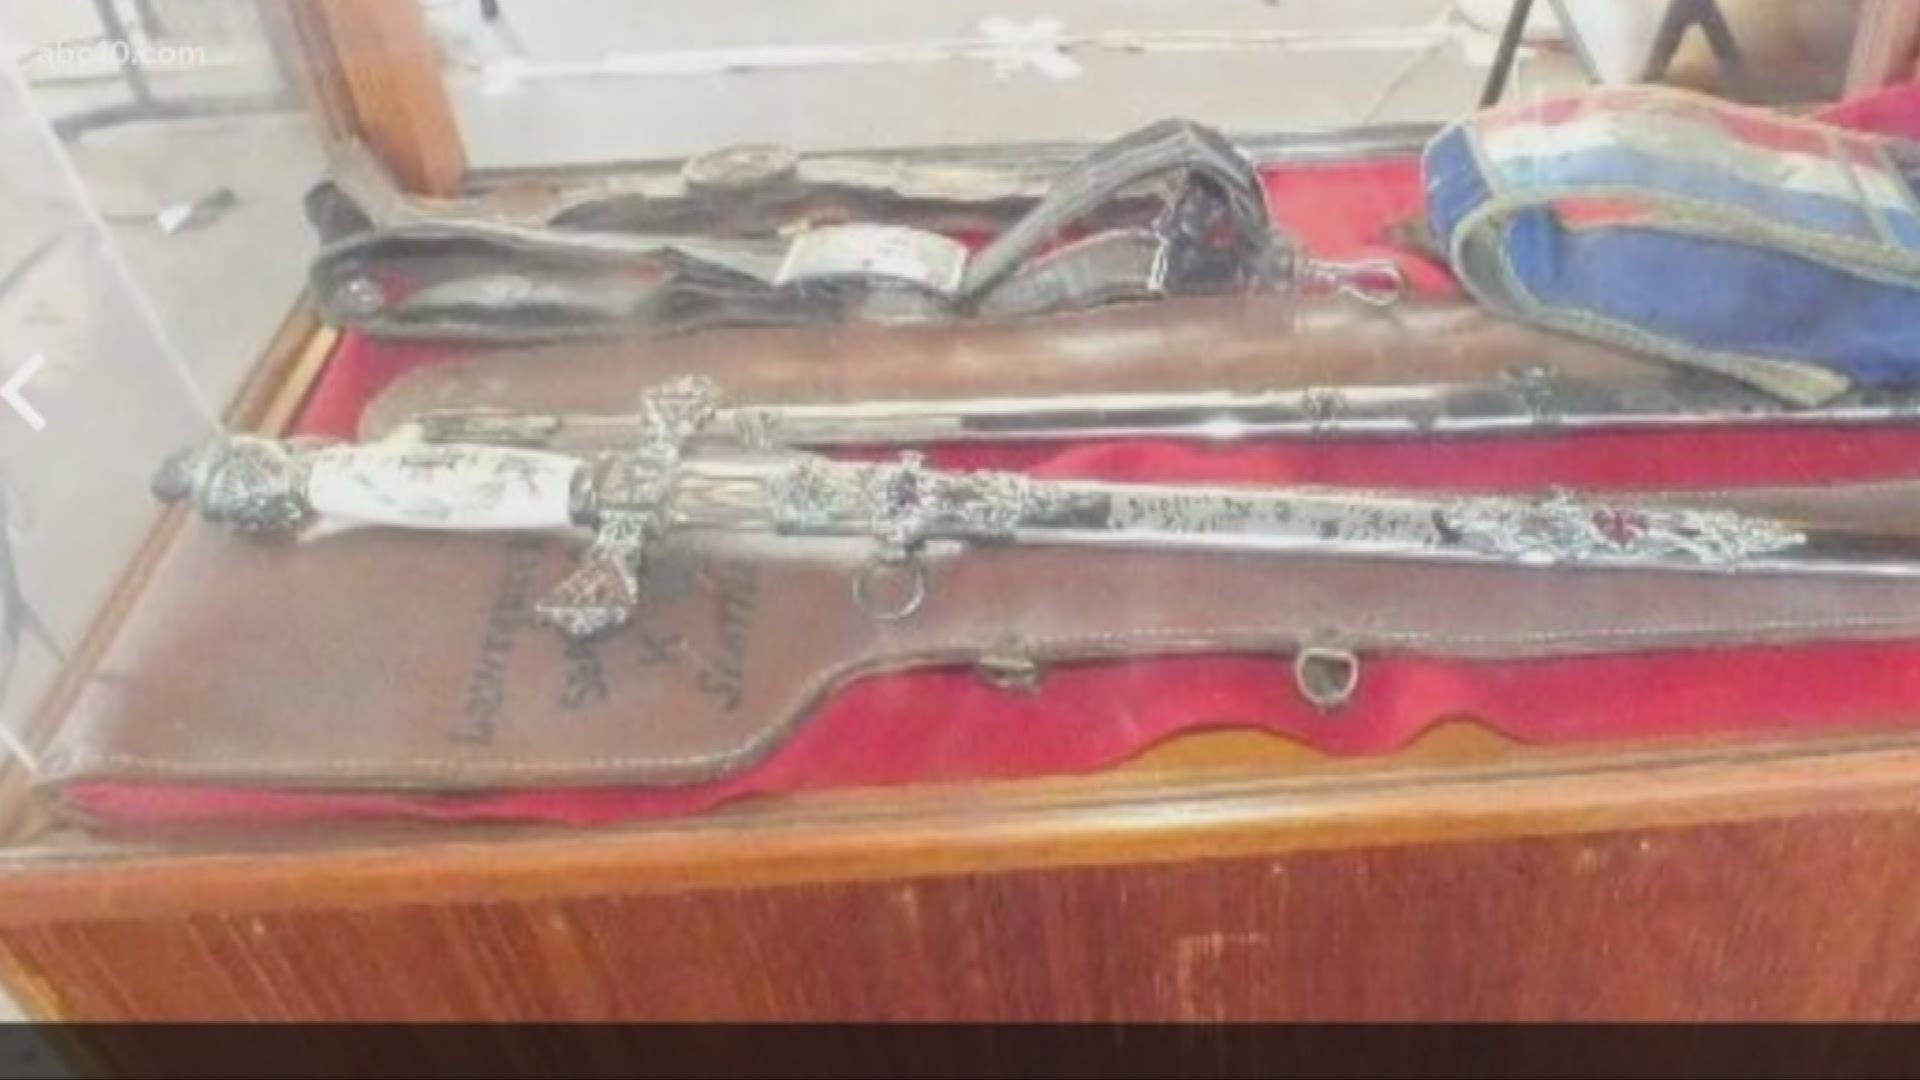 Antique swords, fraternal ribbons and medallions, metal banks, belt buckles, silverware, toys, a coin collection and more were all stolen from dozens of tables setup by estate sales company Treasure Trove Antiques of Stockton.